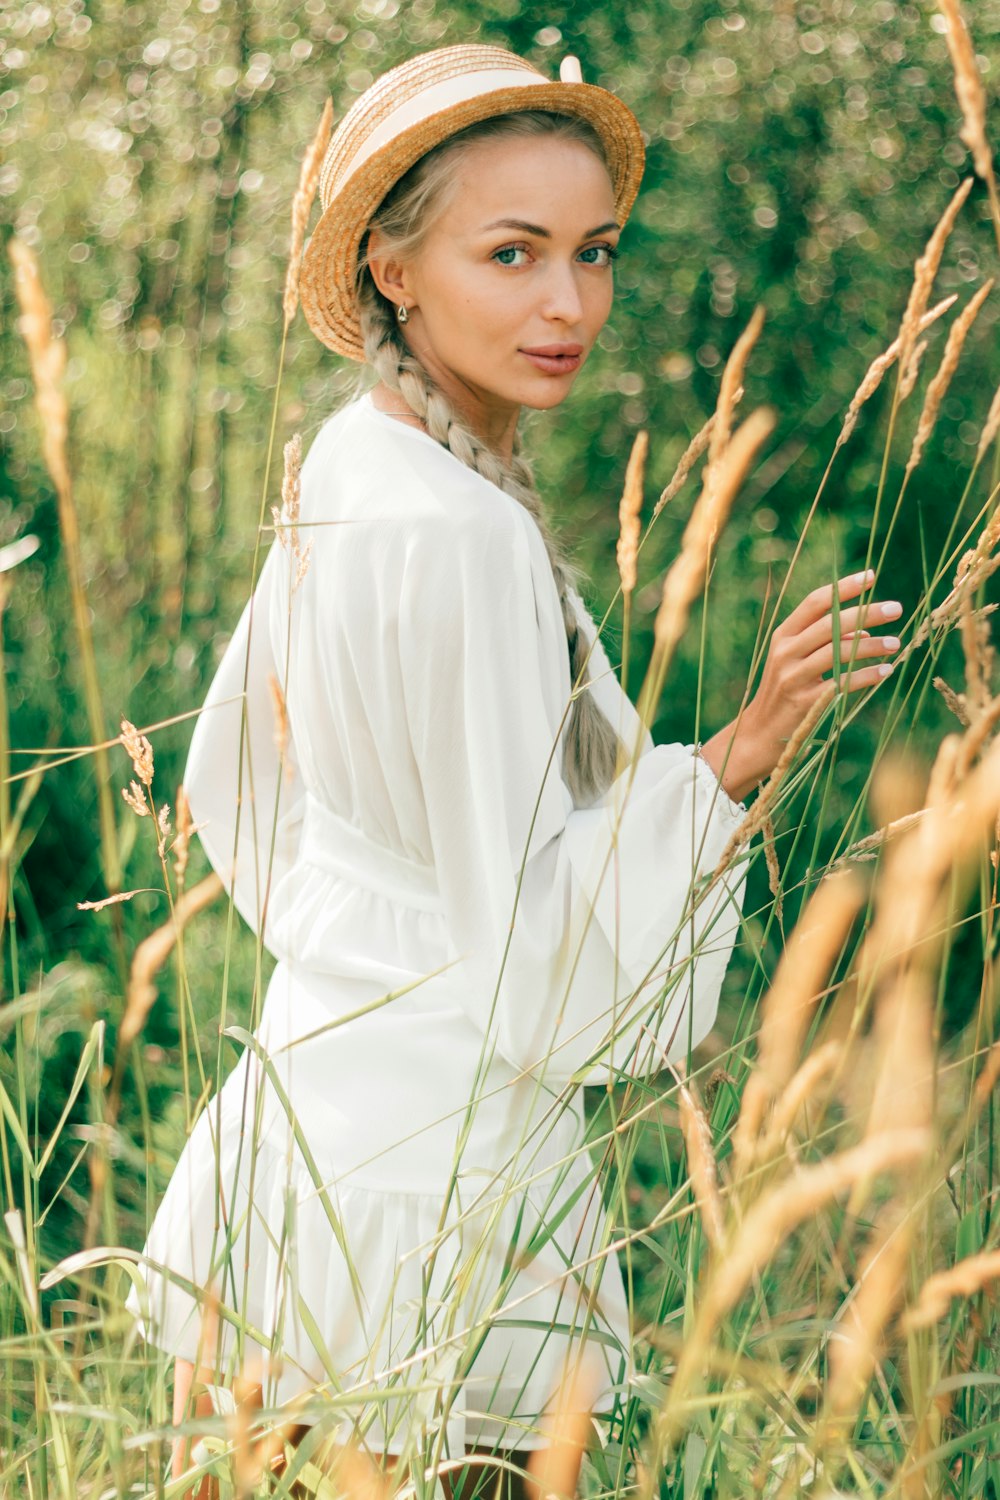 a woman in a white dress and straw hat standing in tall grass